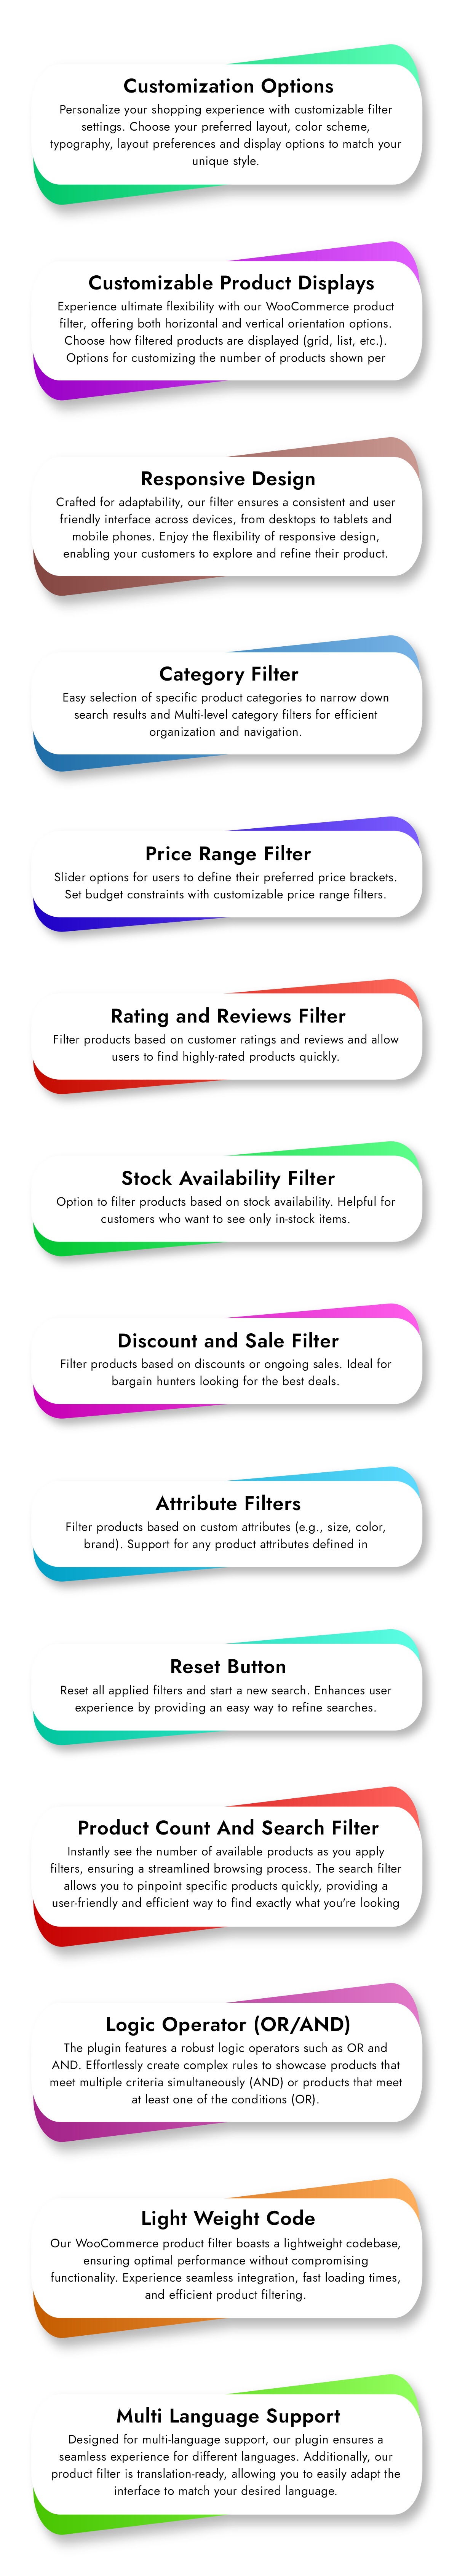 Super WooCommerce Product Filters - 16